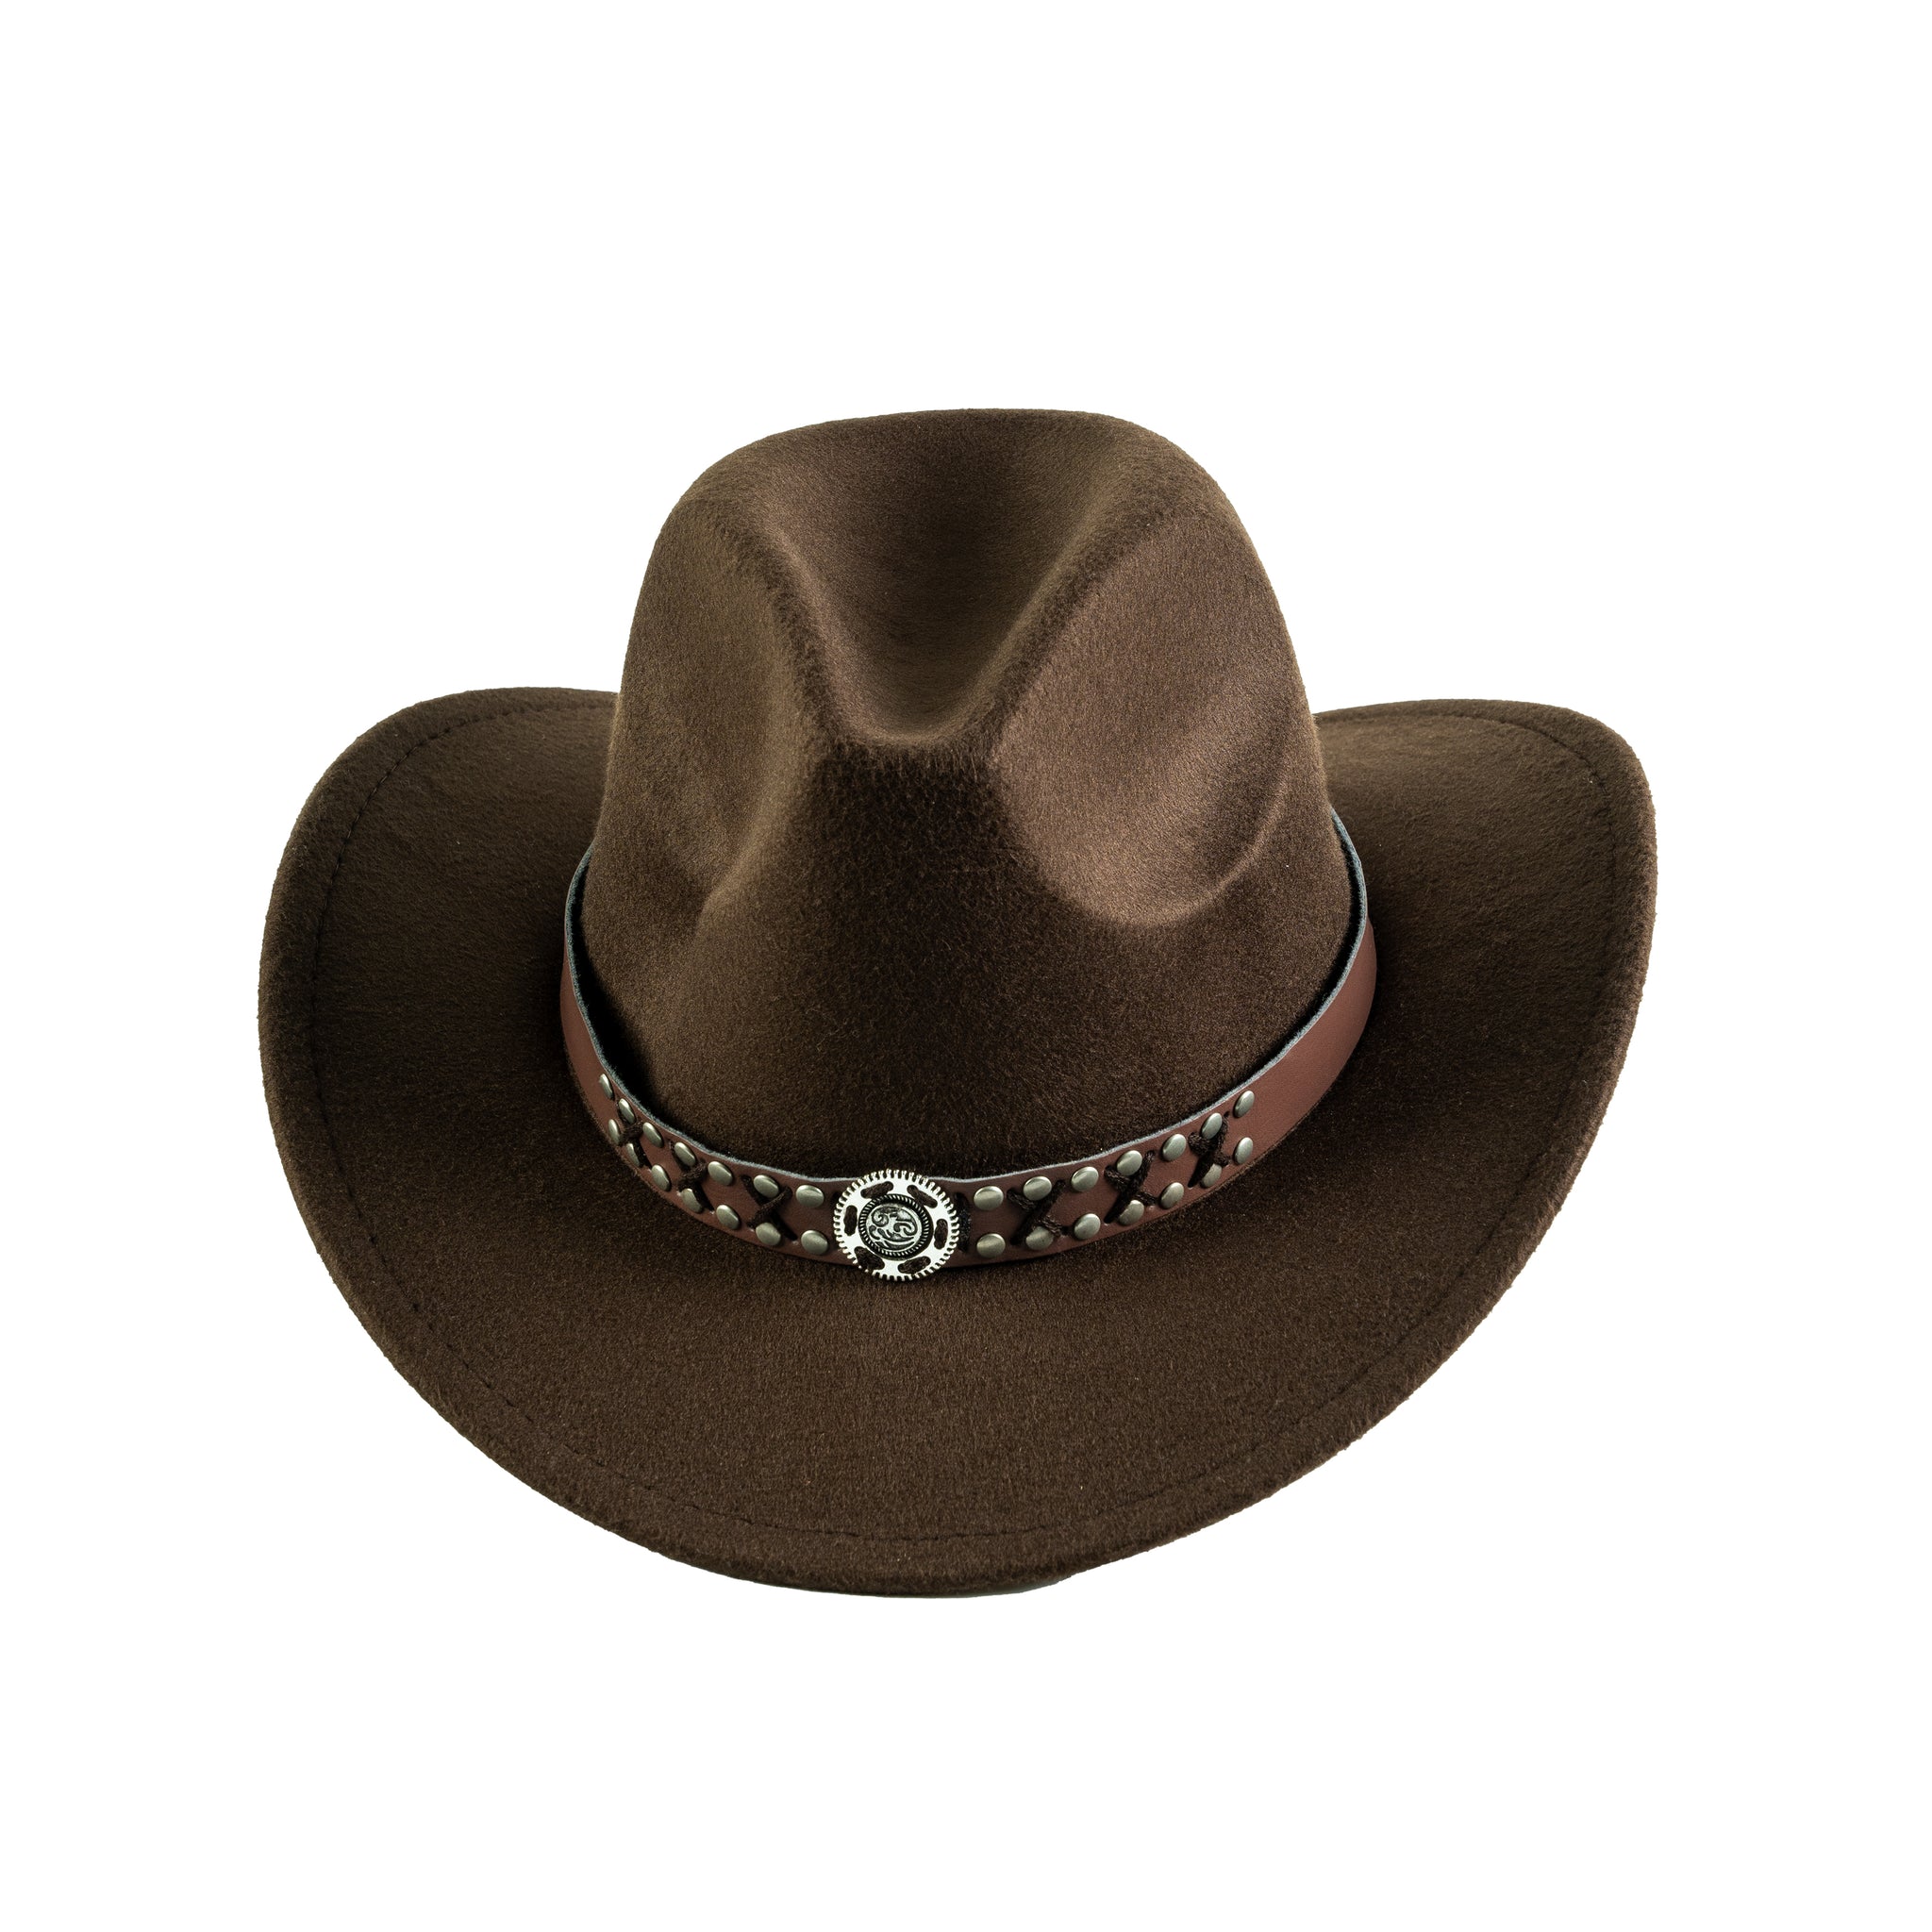 Chokore Cowboy Hat with Vegan Leather Embellished Belt (Chocolate Brown)